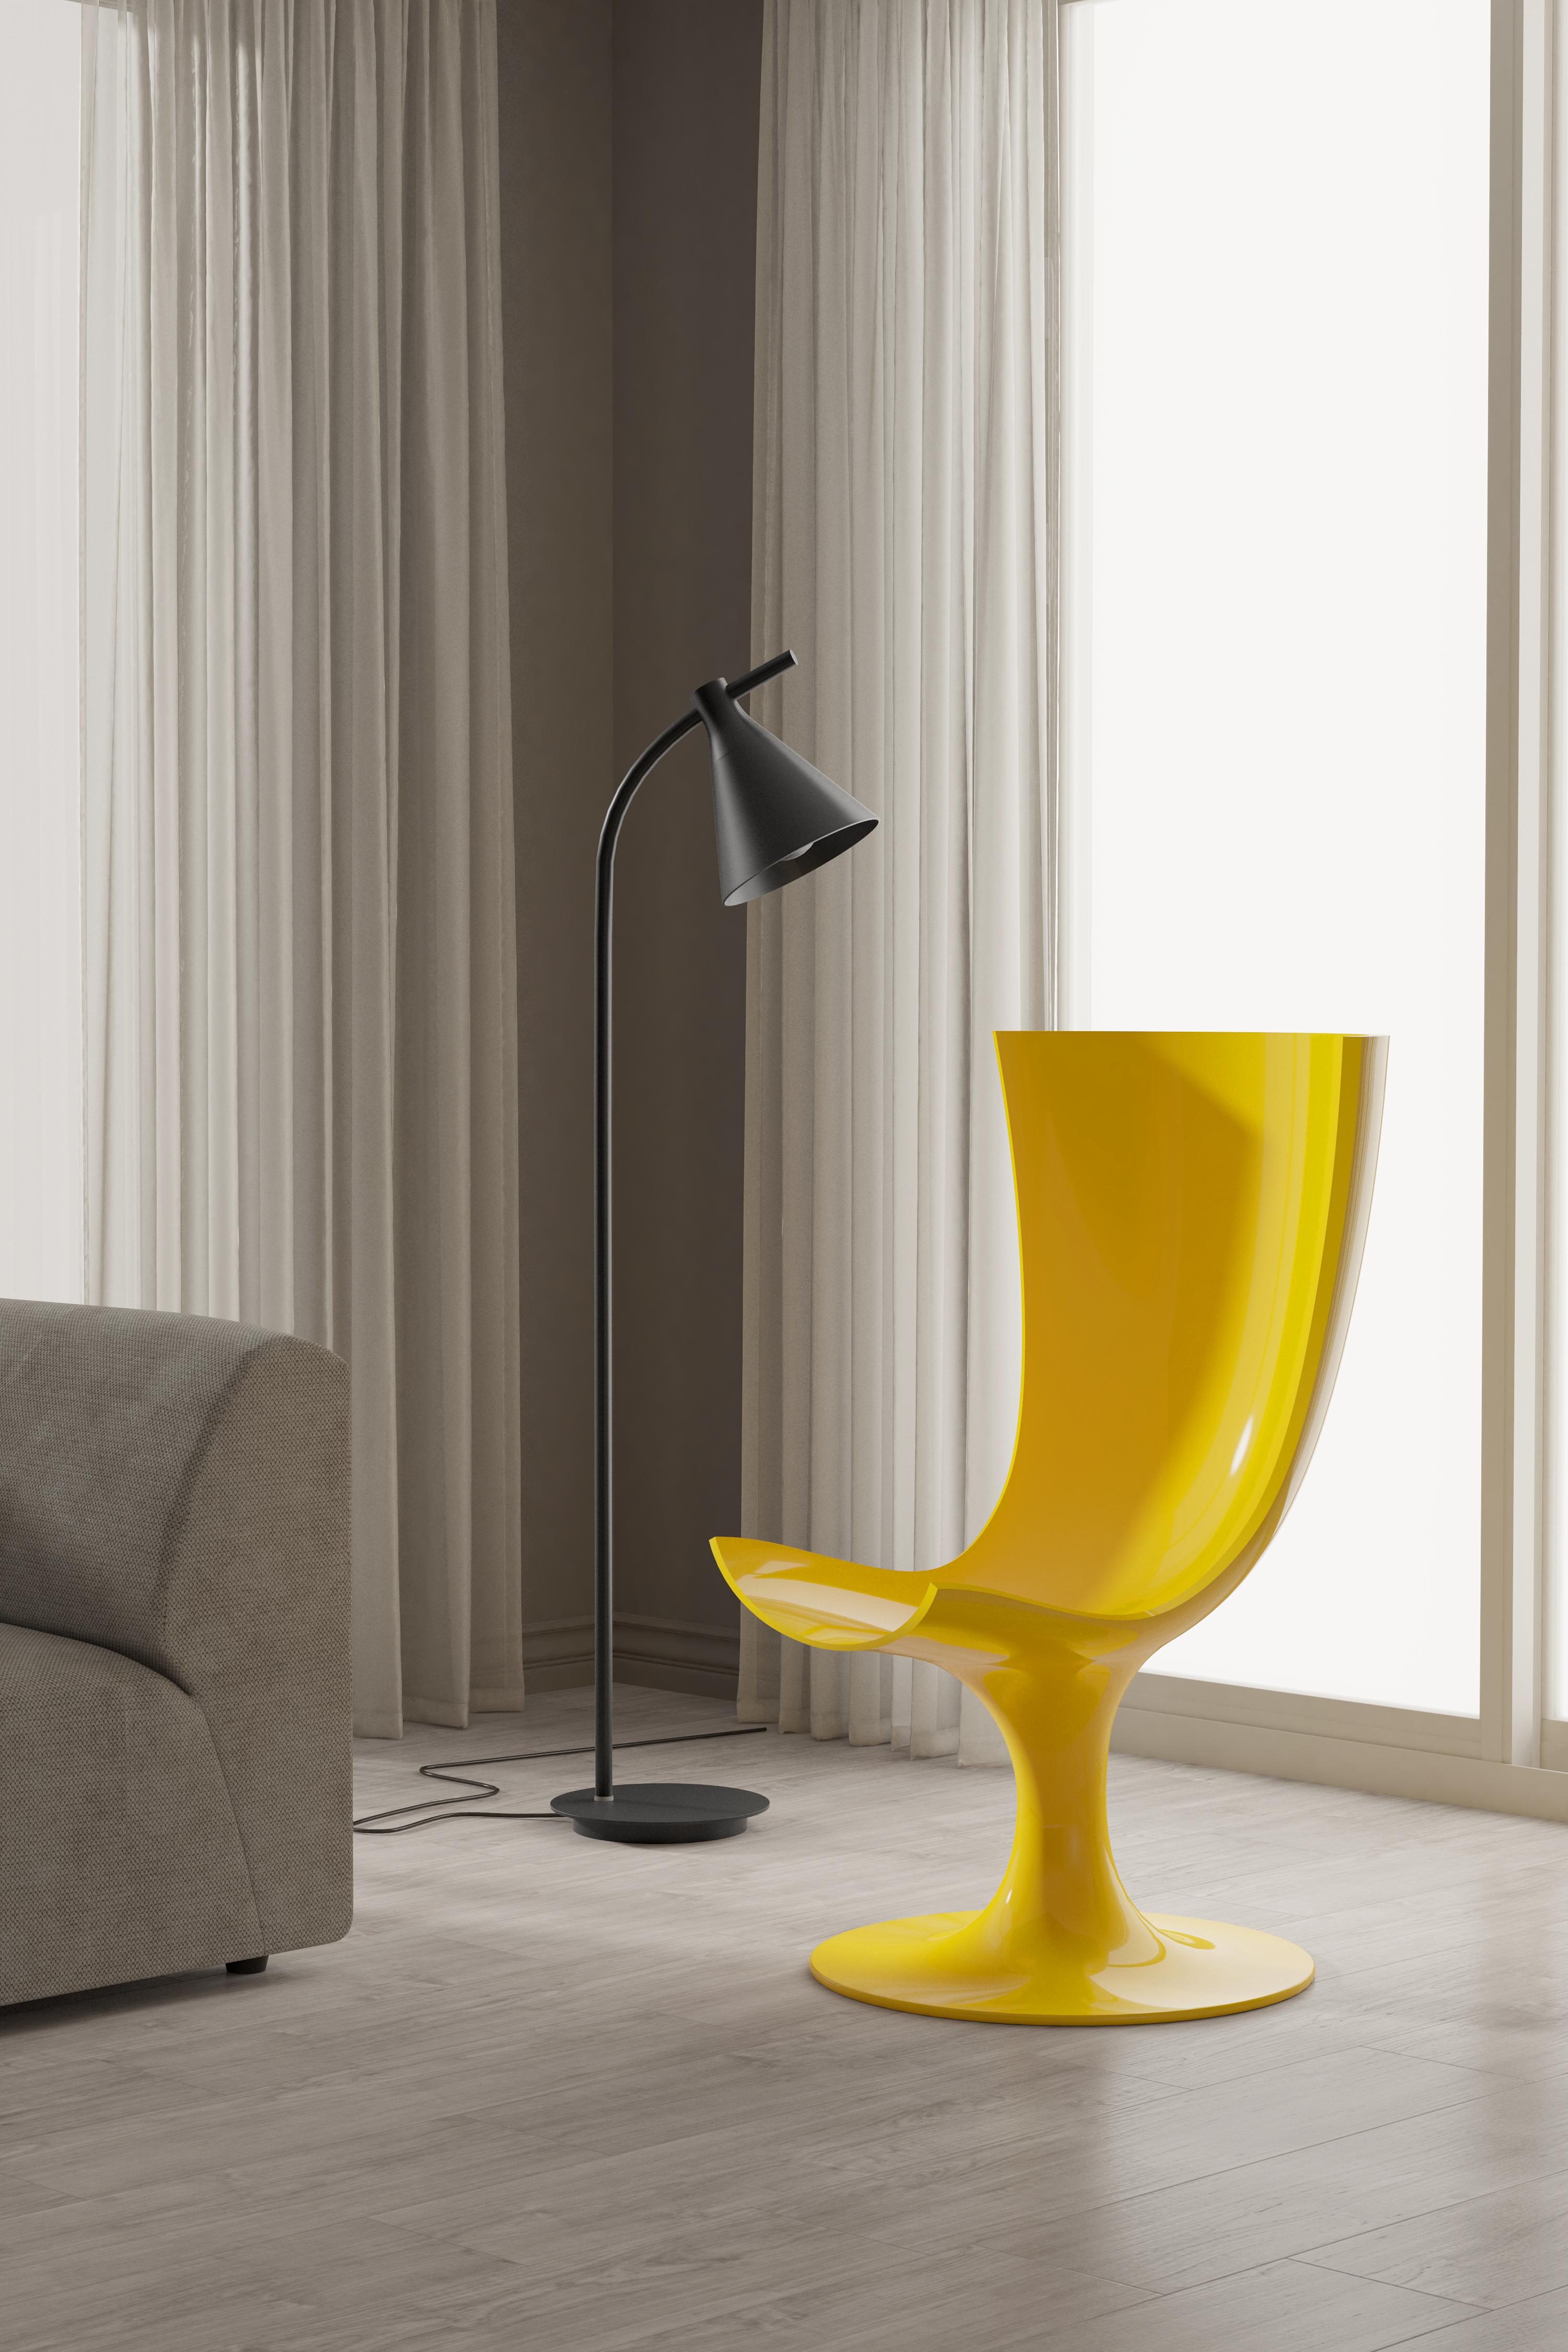 Santos Chair


Somewhere between an imposing throne and a glass of champagne, Santos, designed by Joel Escalona, is suitable for use in halls, bars, hotels, homes and even outdoors. It will not go unnoticed.
Santos Chair designed by Joel Escalona,